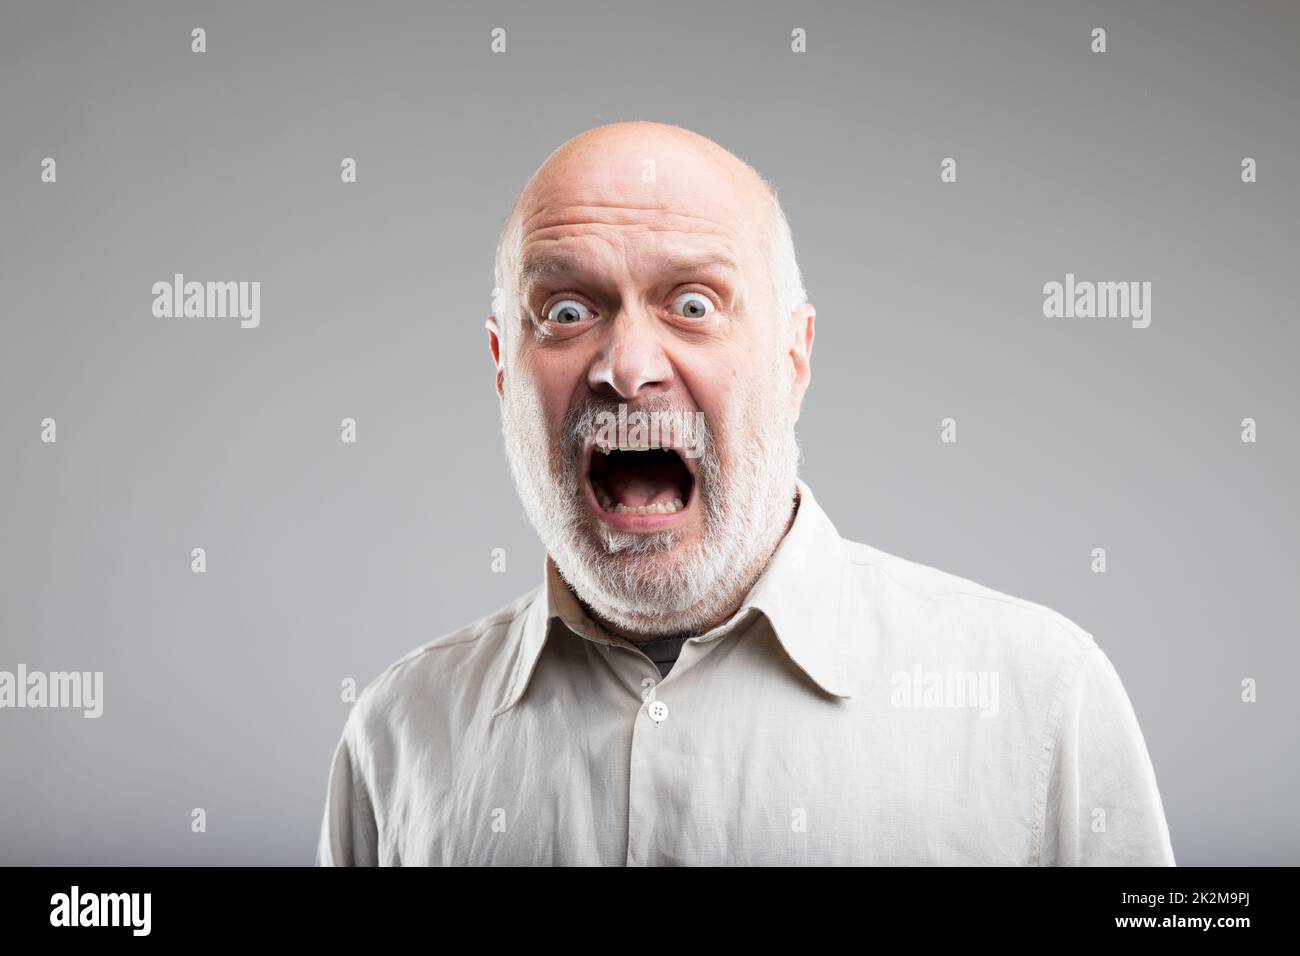 strong exaggerated fear expression of an old man Stock Photo